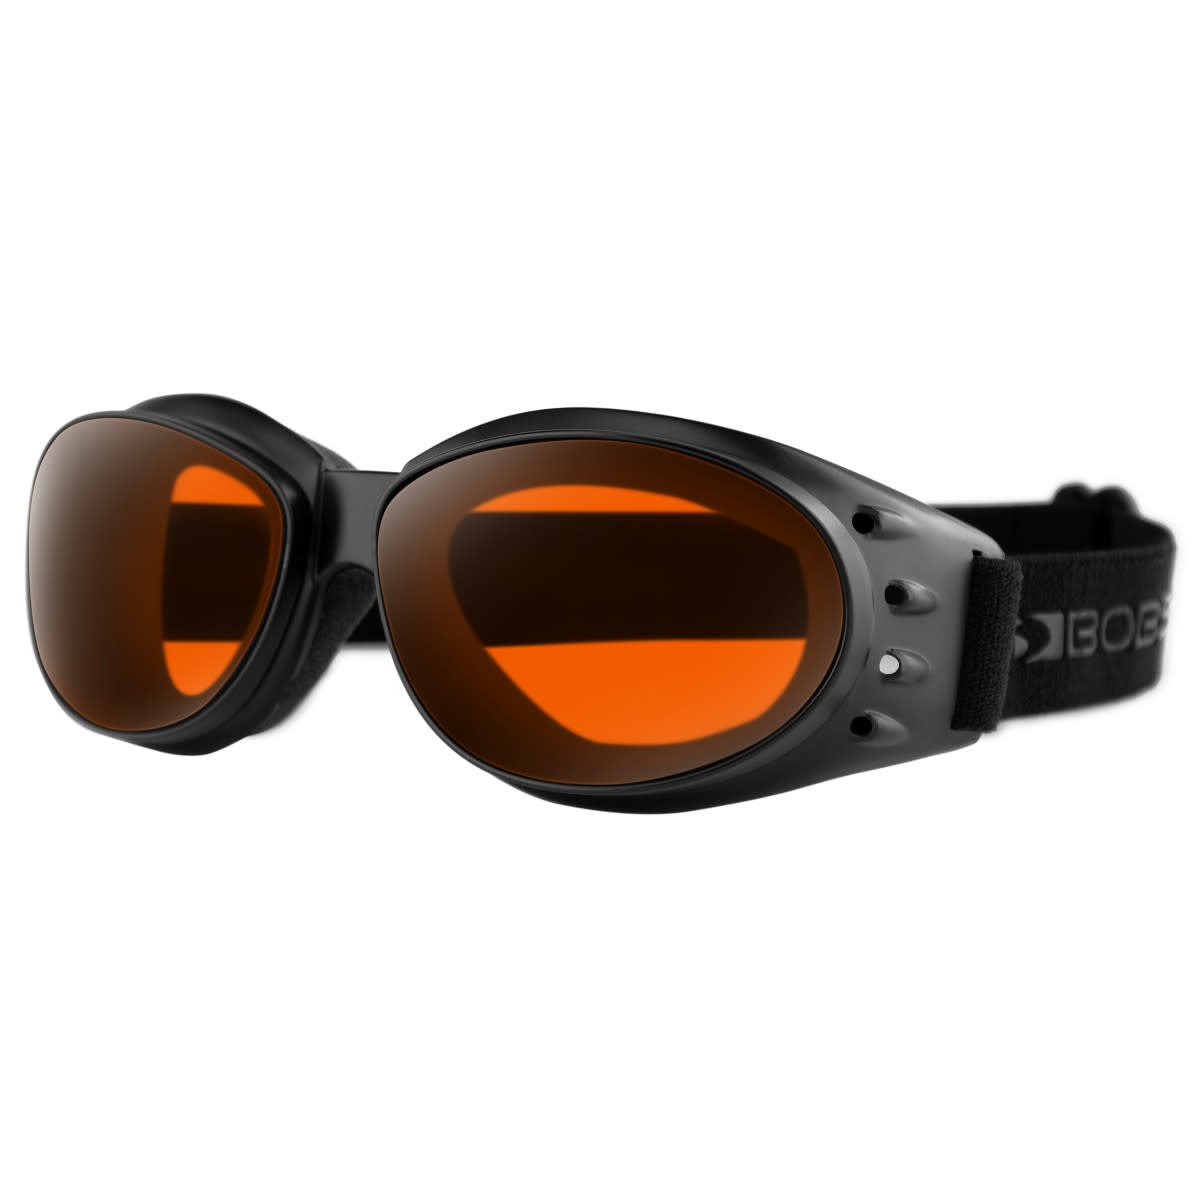 Bobster ESB Shooting Sunglasses, Black Frame/3 Lenses (Smoked, Amber and  Clear)